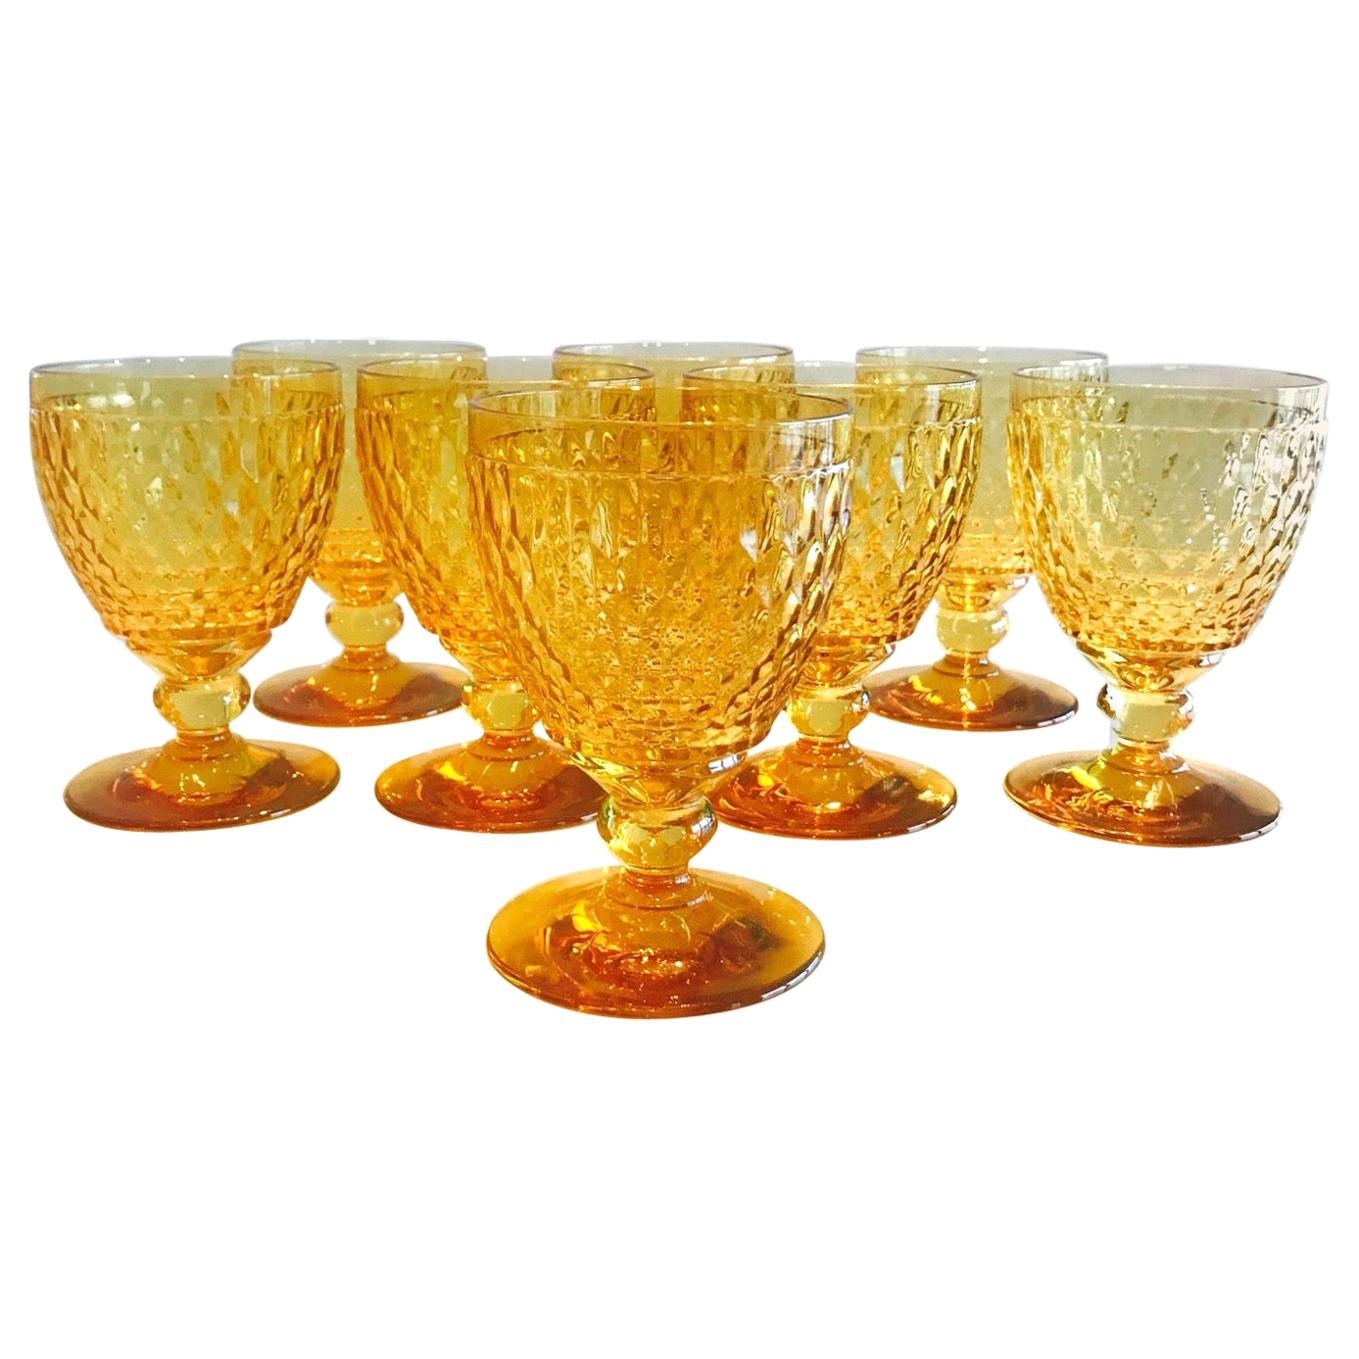 Vintage Crystal Amber Colored Goblets by Villeroy & Boch, Set of Eight